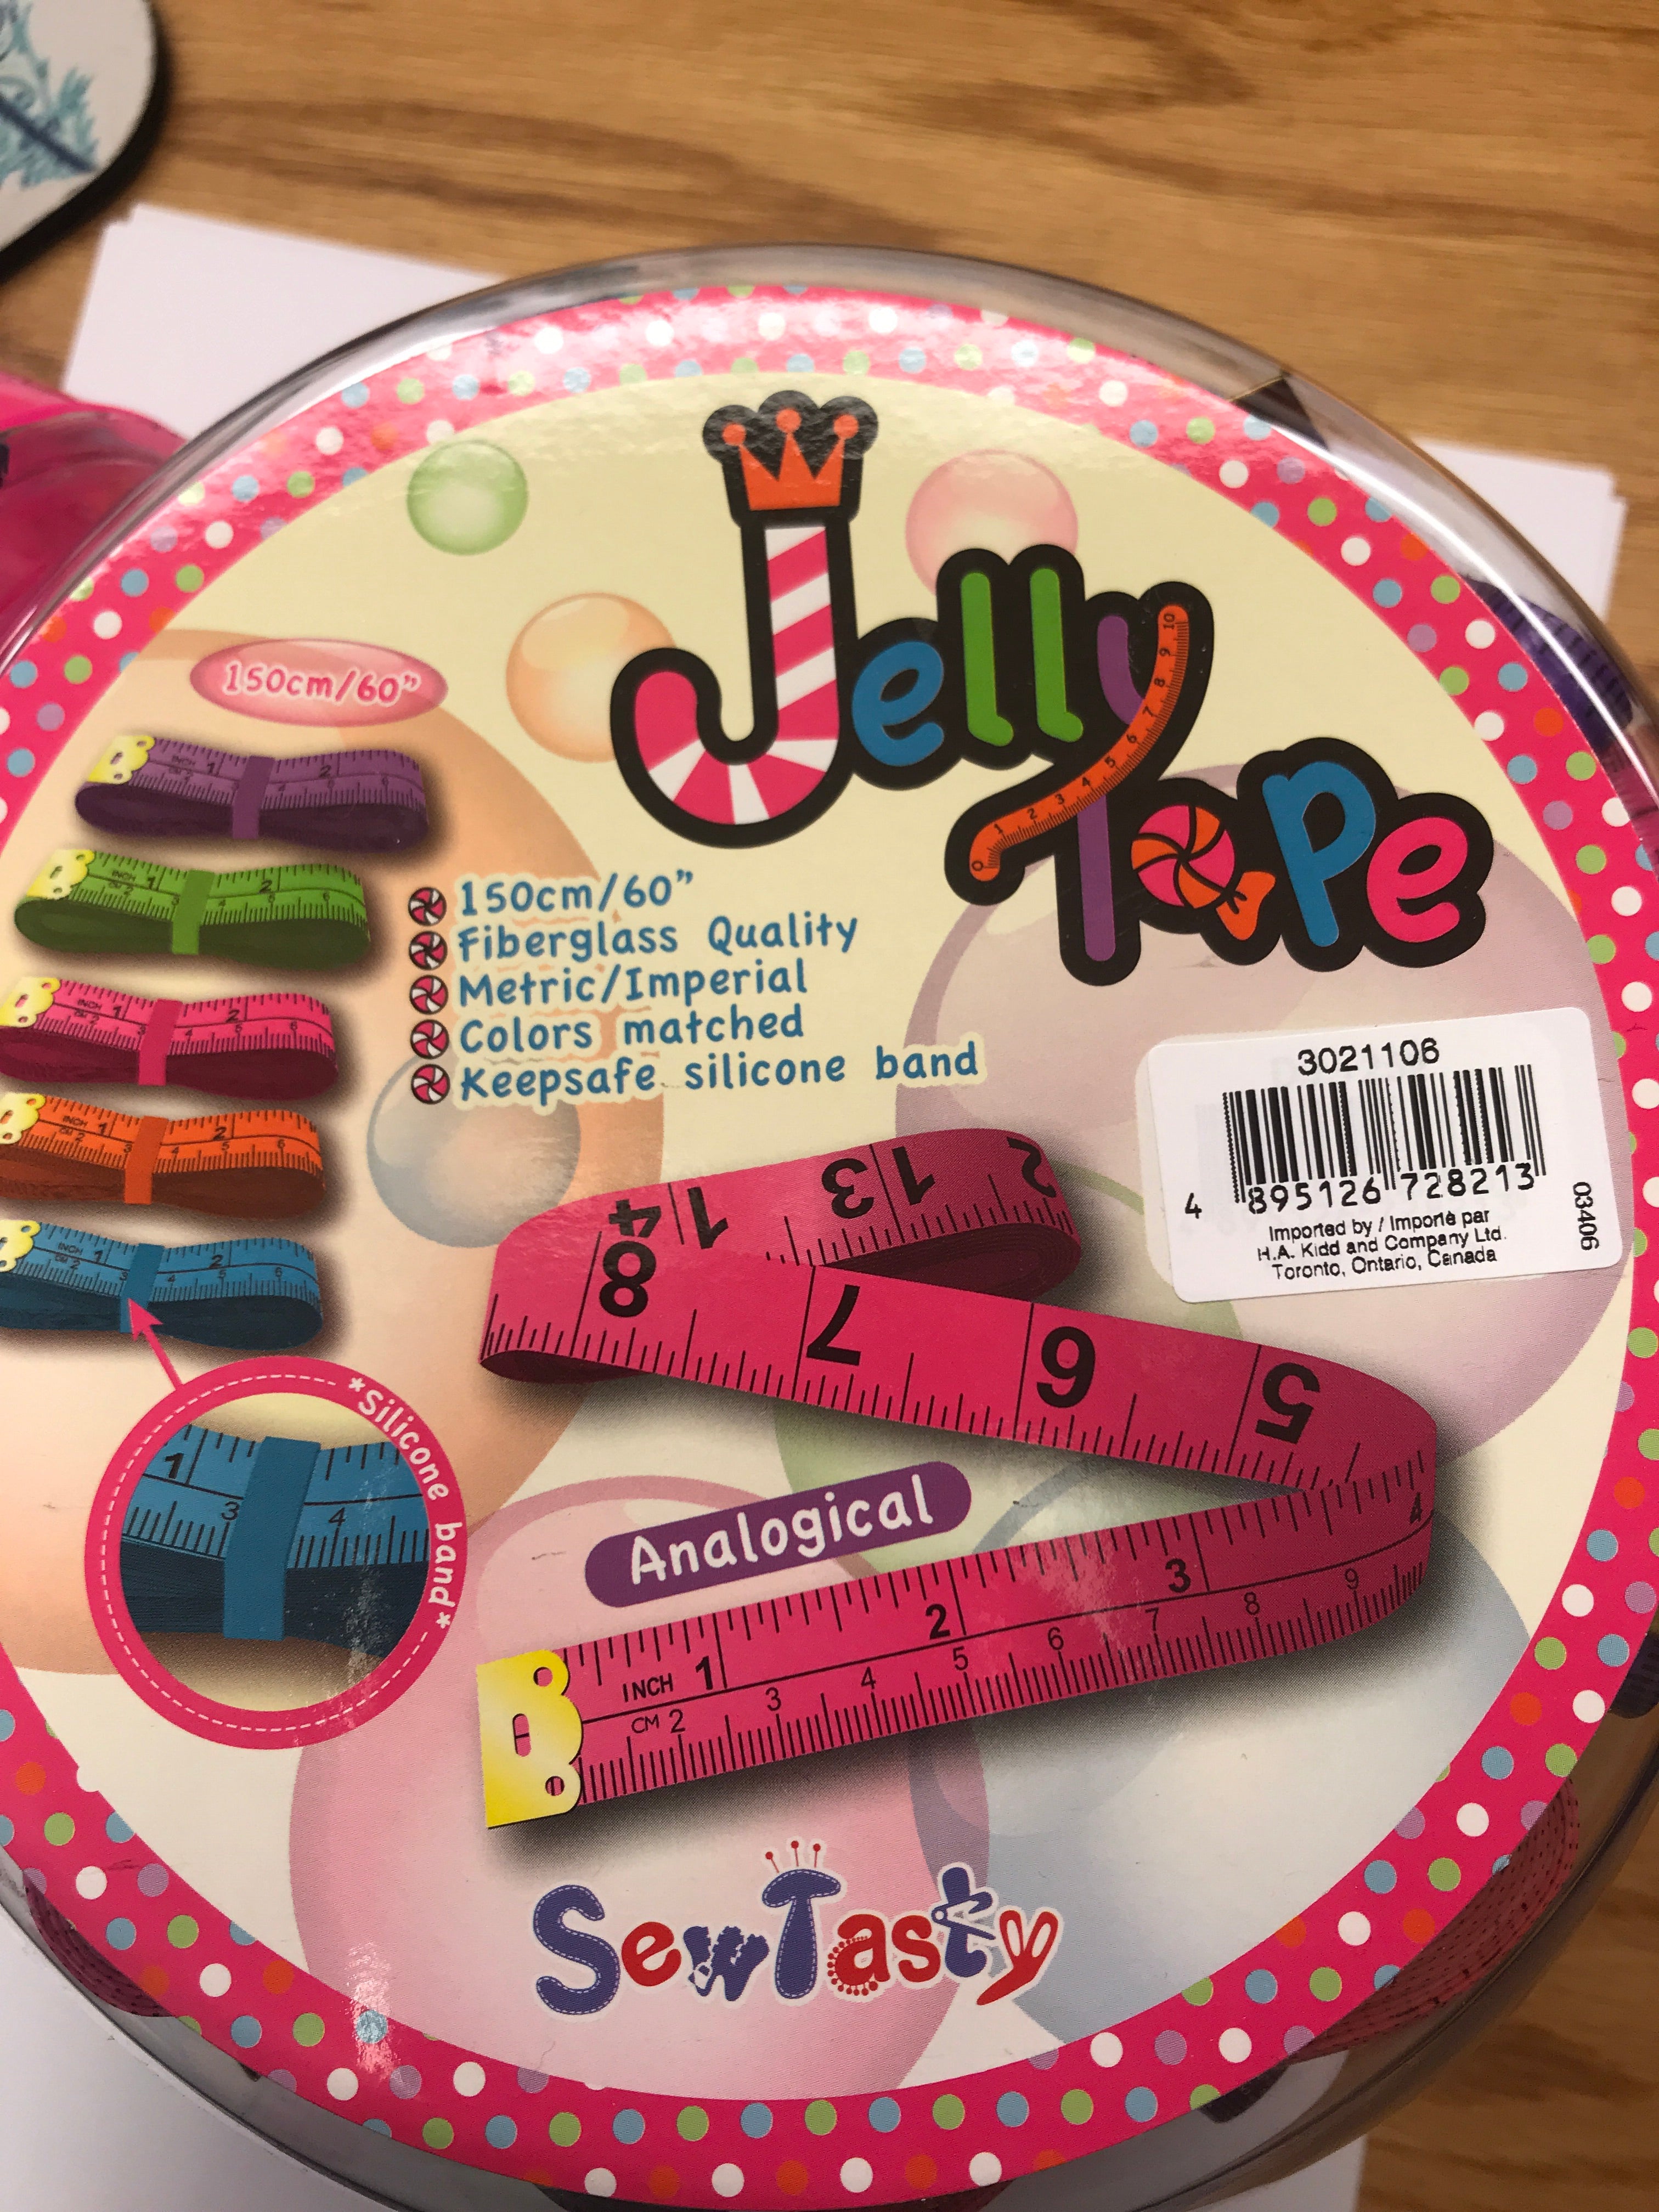 Jelly Tape Measures - 60"(150cm) - 3021106